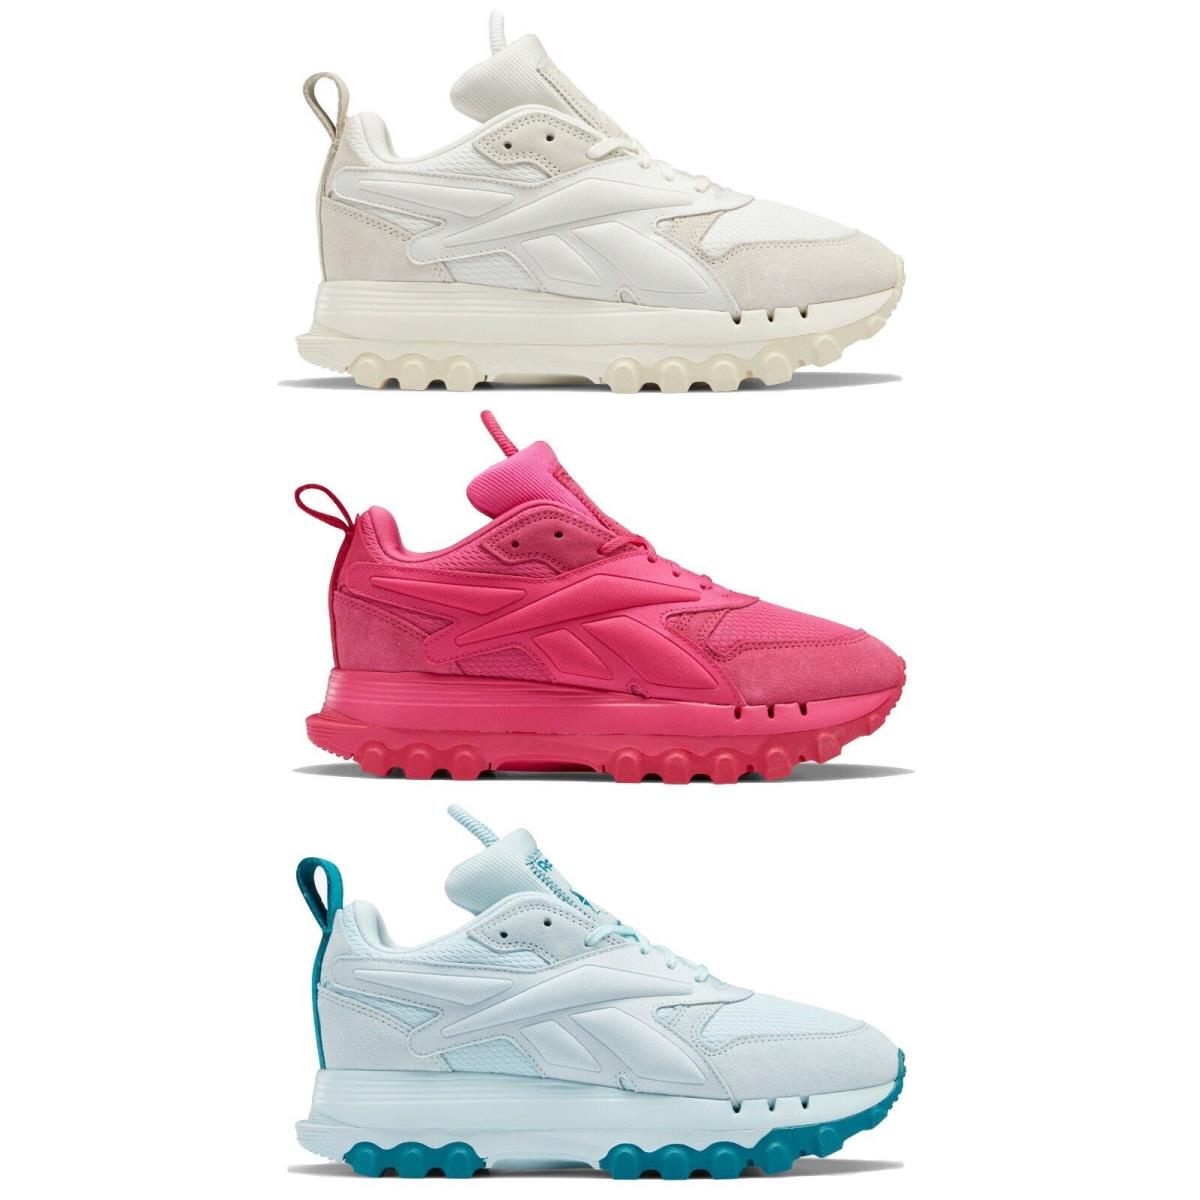 Reebok Cardi B Classic Leather V2 Women`s Shoes All Colors US Sizes 6-11 - ALL COLORS